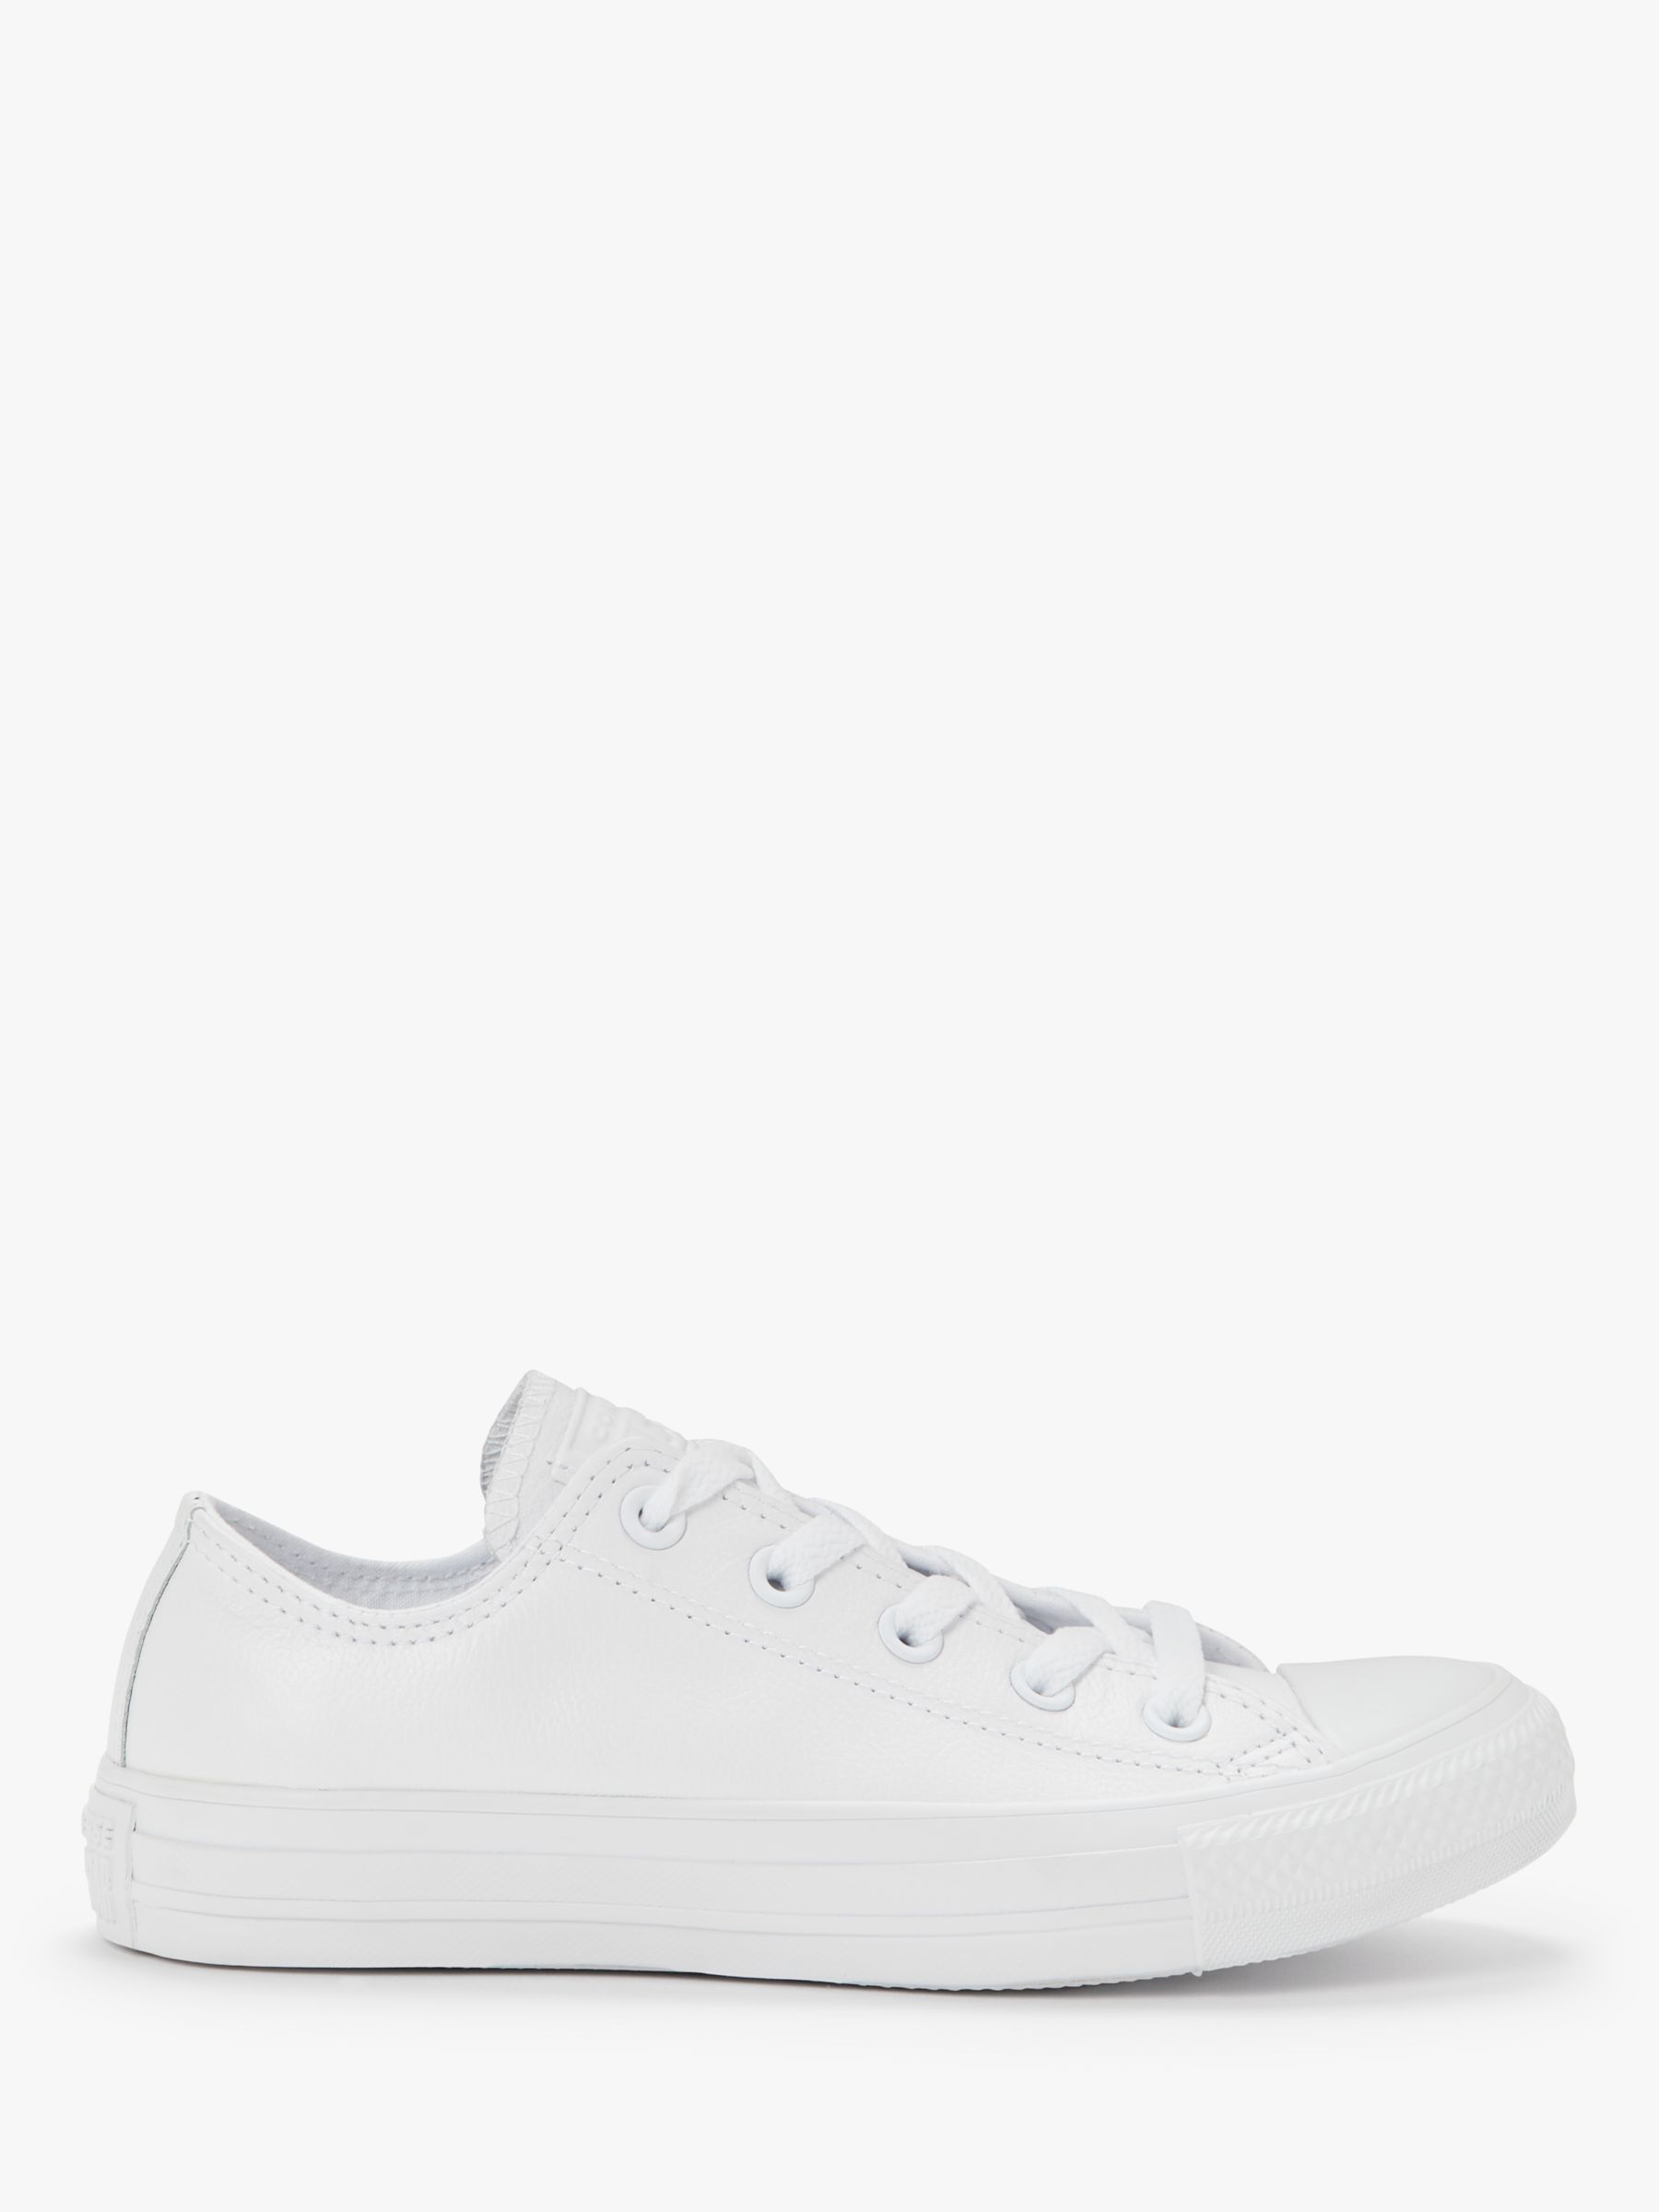 converse chuck taylor all star trainers